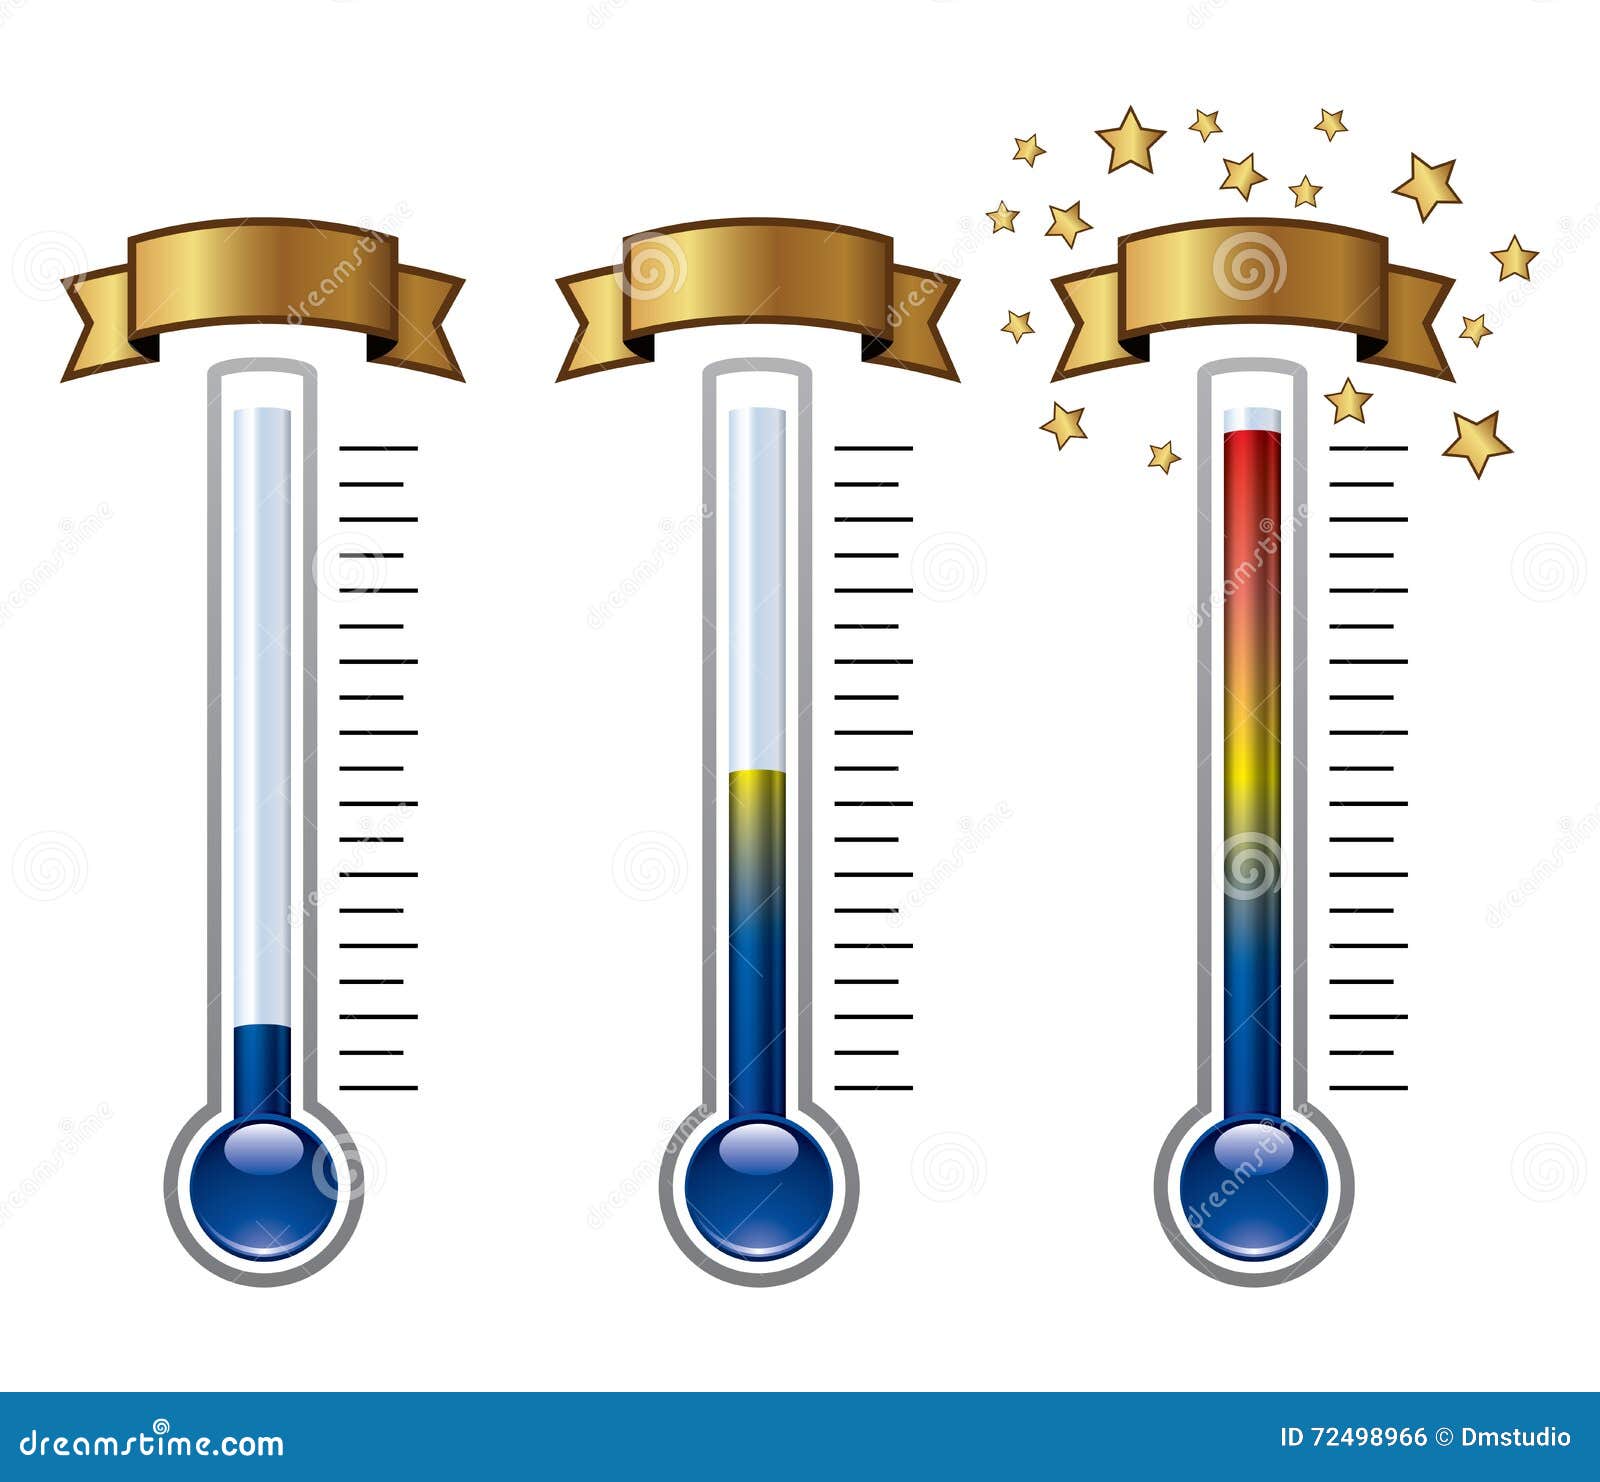 thermometers, 